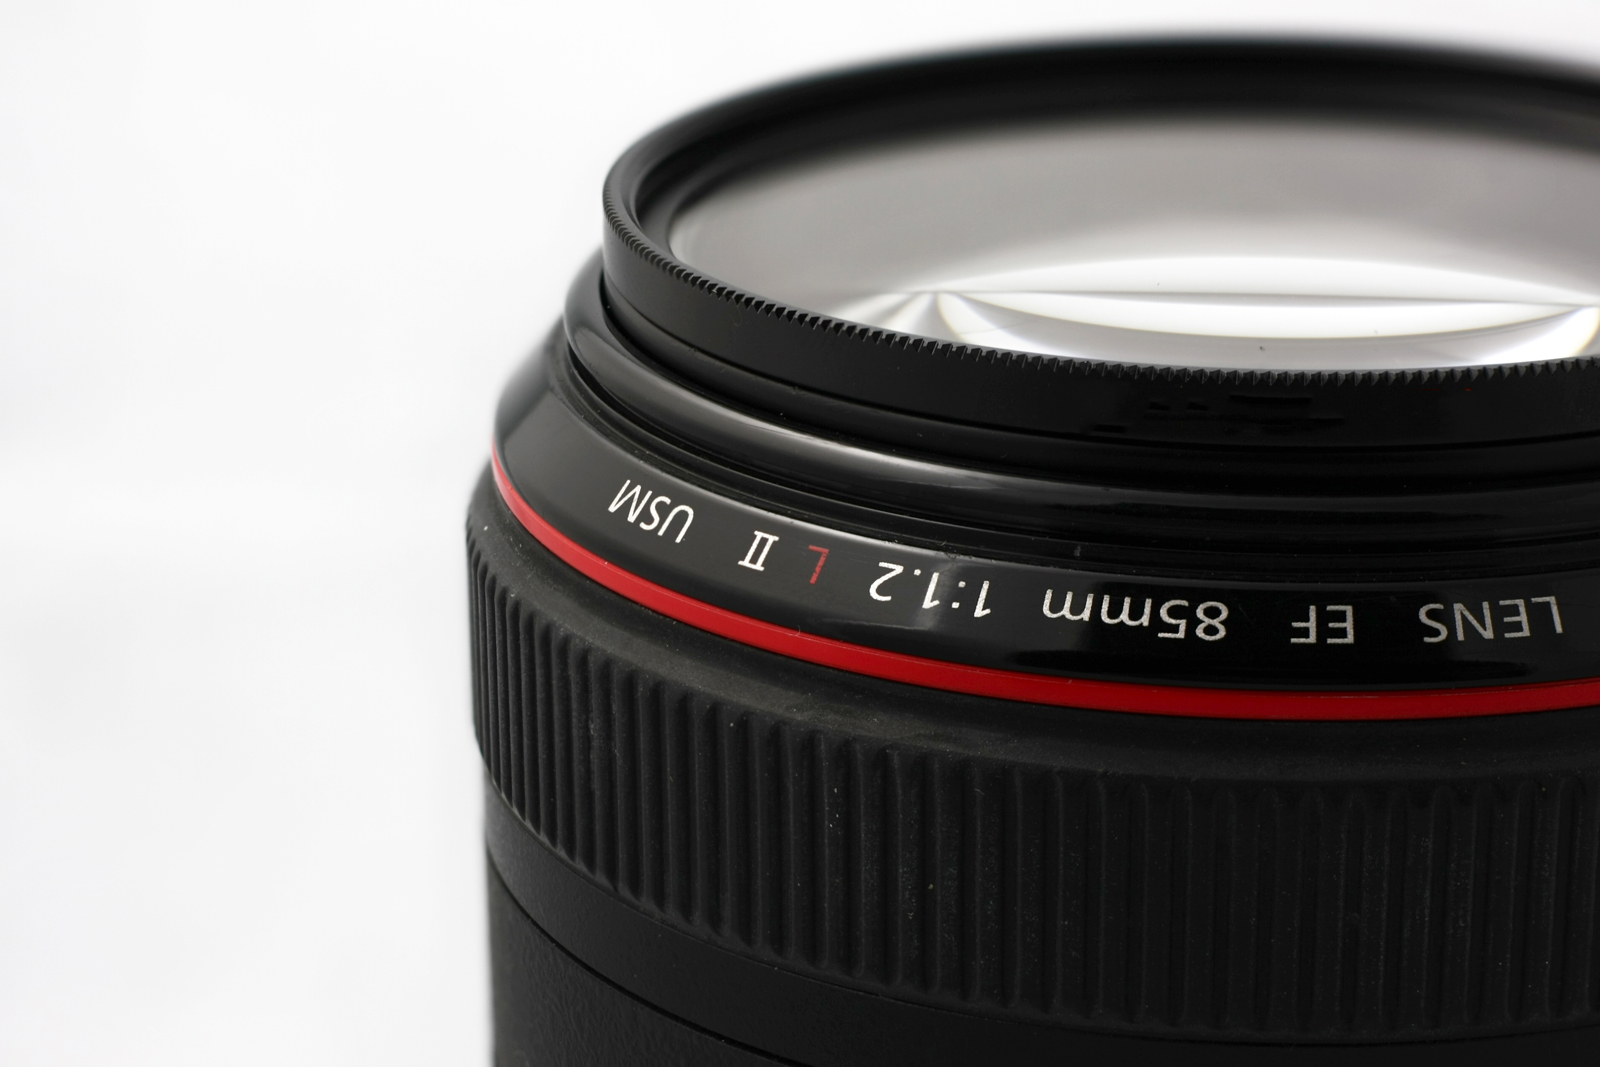 Review - Canon EF 85mm f/1.2L II